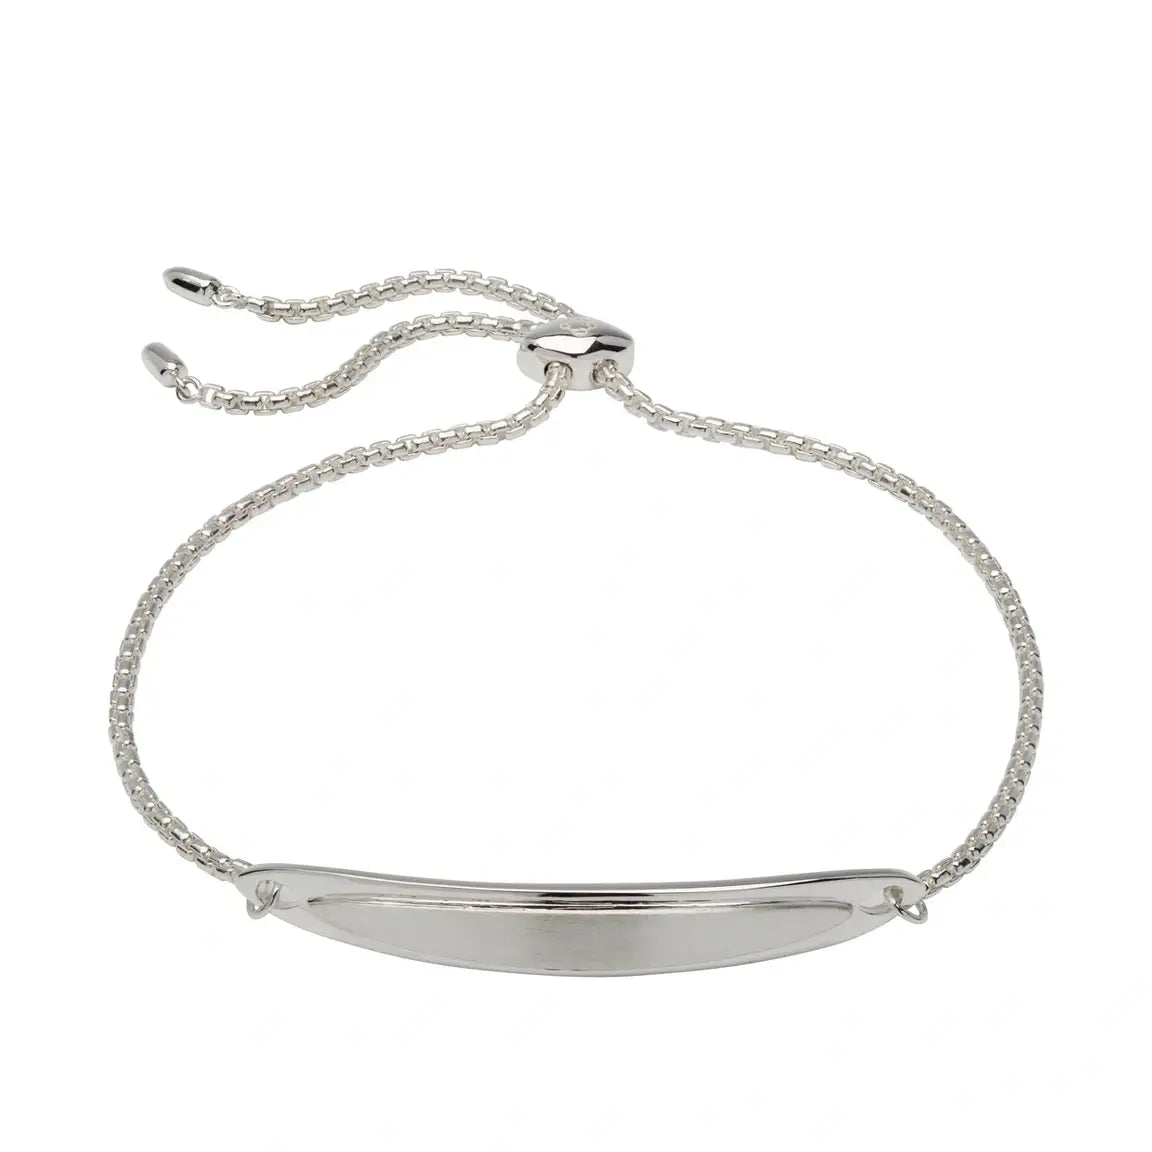 Silver bracelet with engravable plate